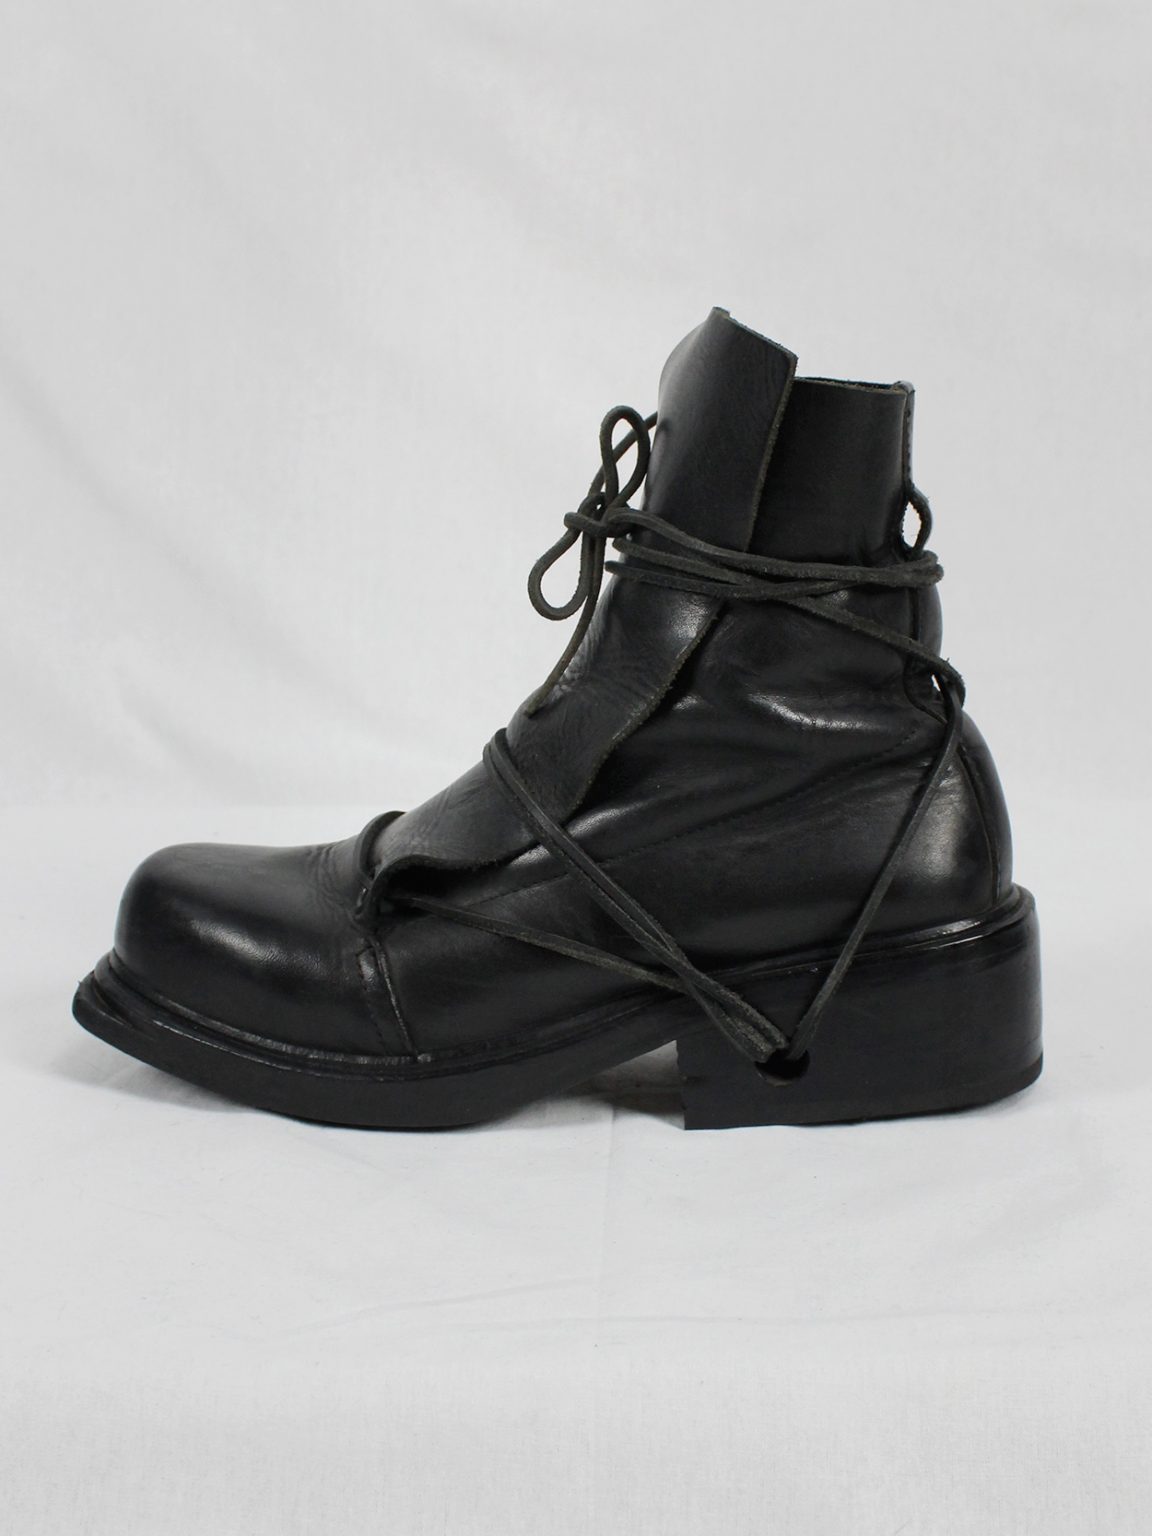 Dirk Bikkembergs black mountaineering boots with laces through the soles (40) — late 90's